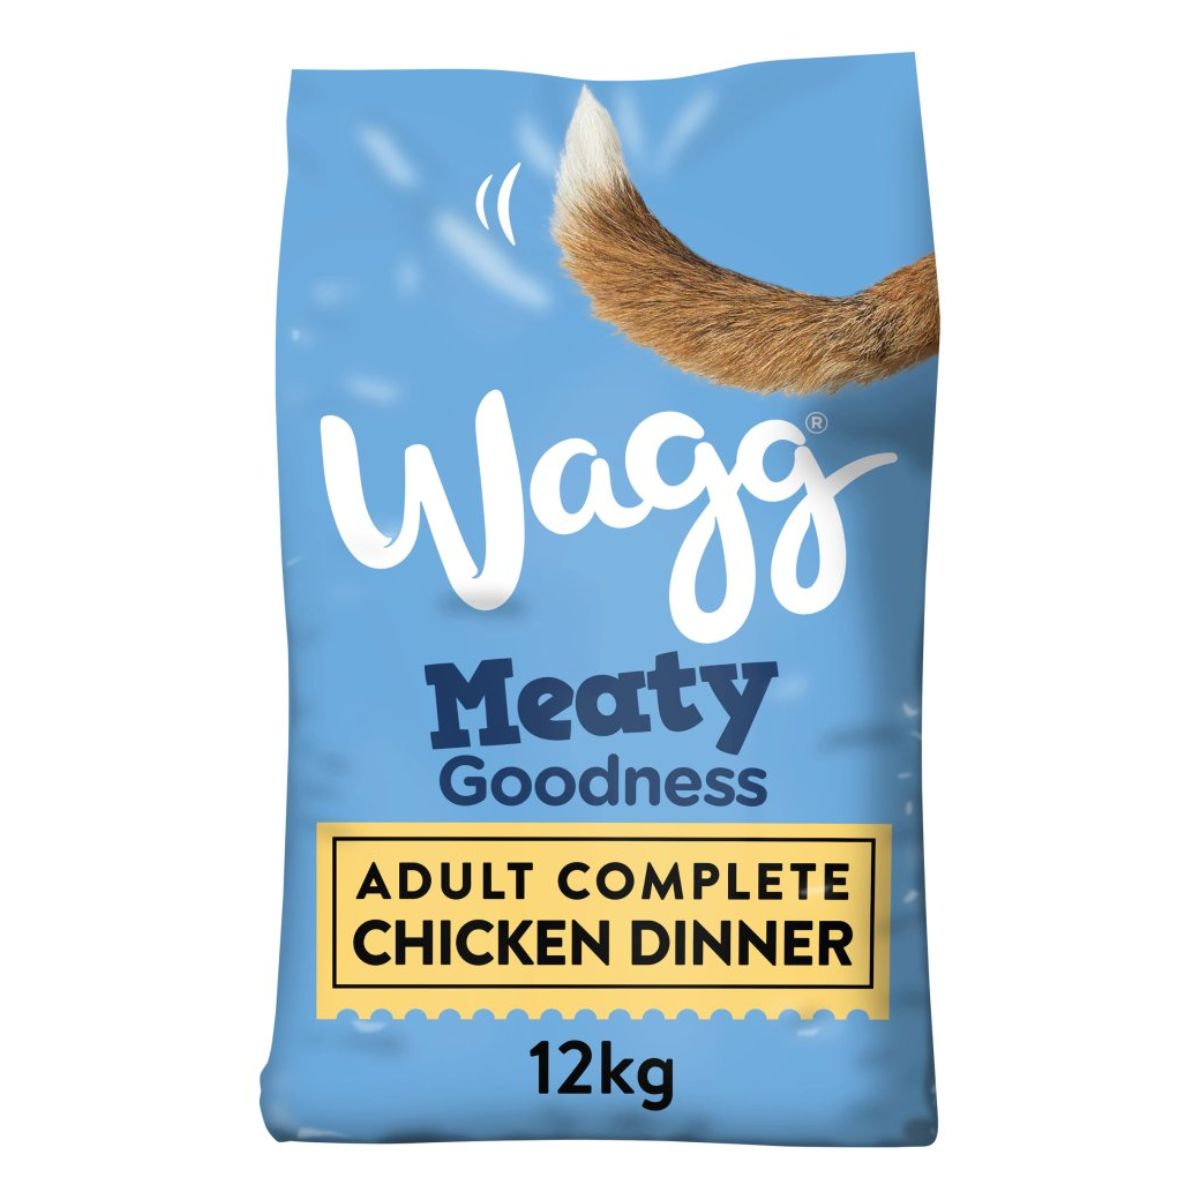 Wagg - Meaty Goodness Adult Complete Chicken Dinner - 12kg